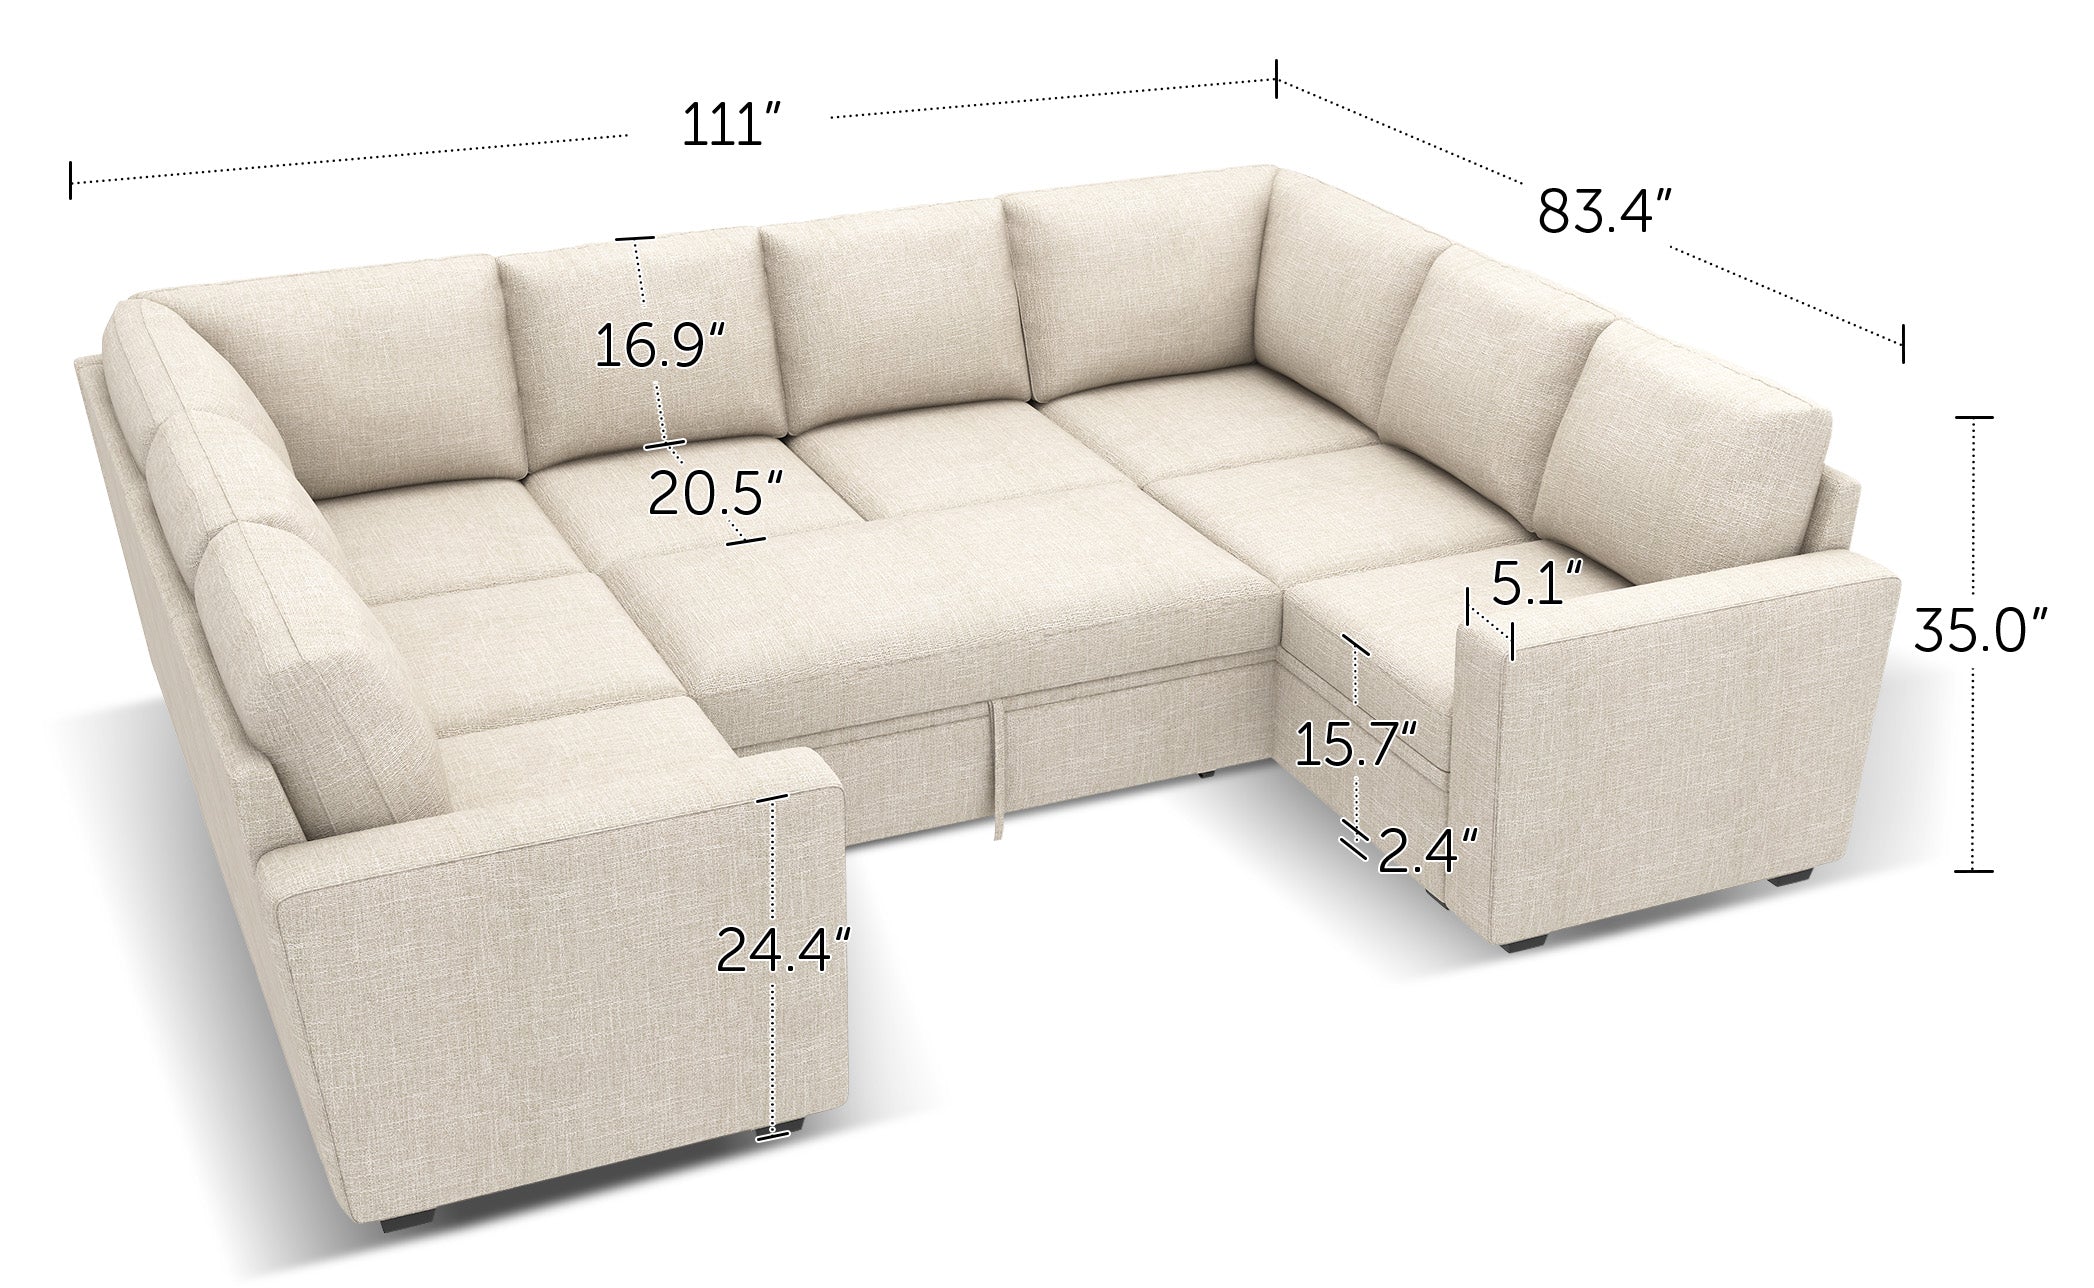 HONBAY 8-Piece Modular Sleeper Sectional With Storage Space #Color_Beige